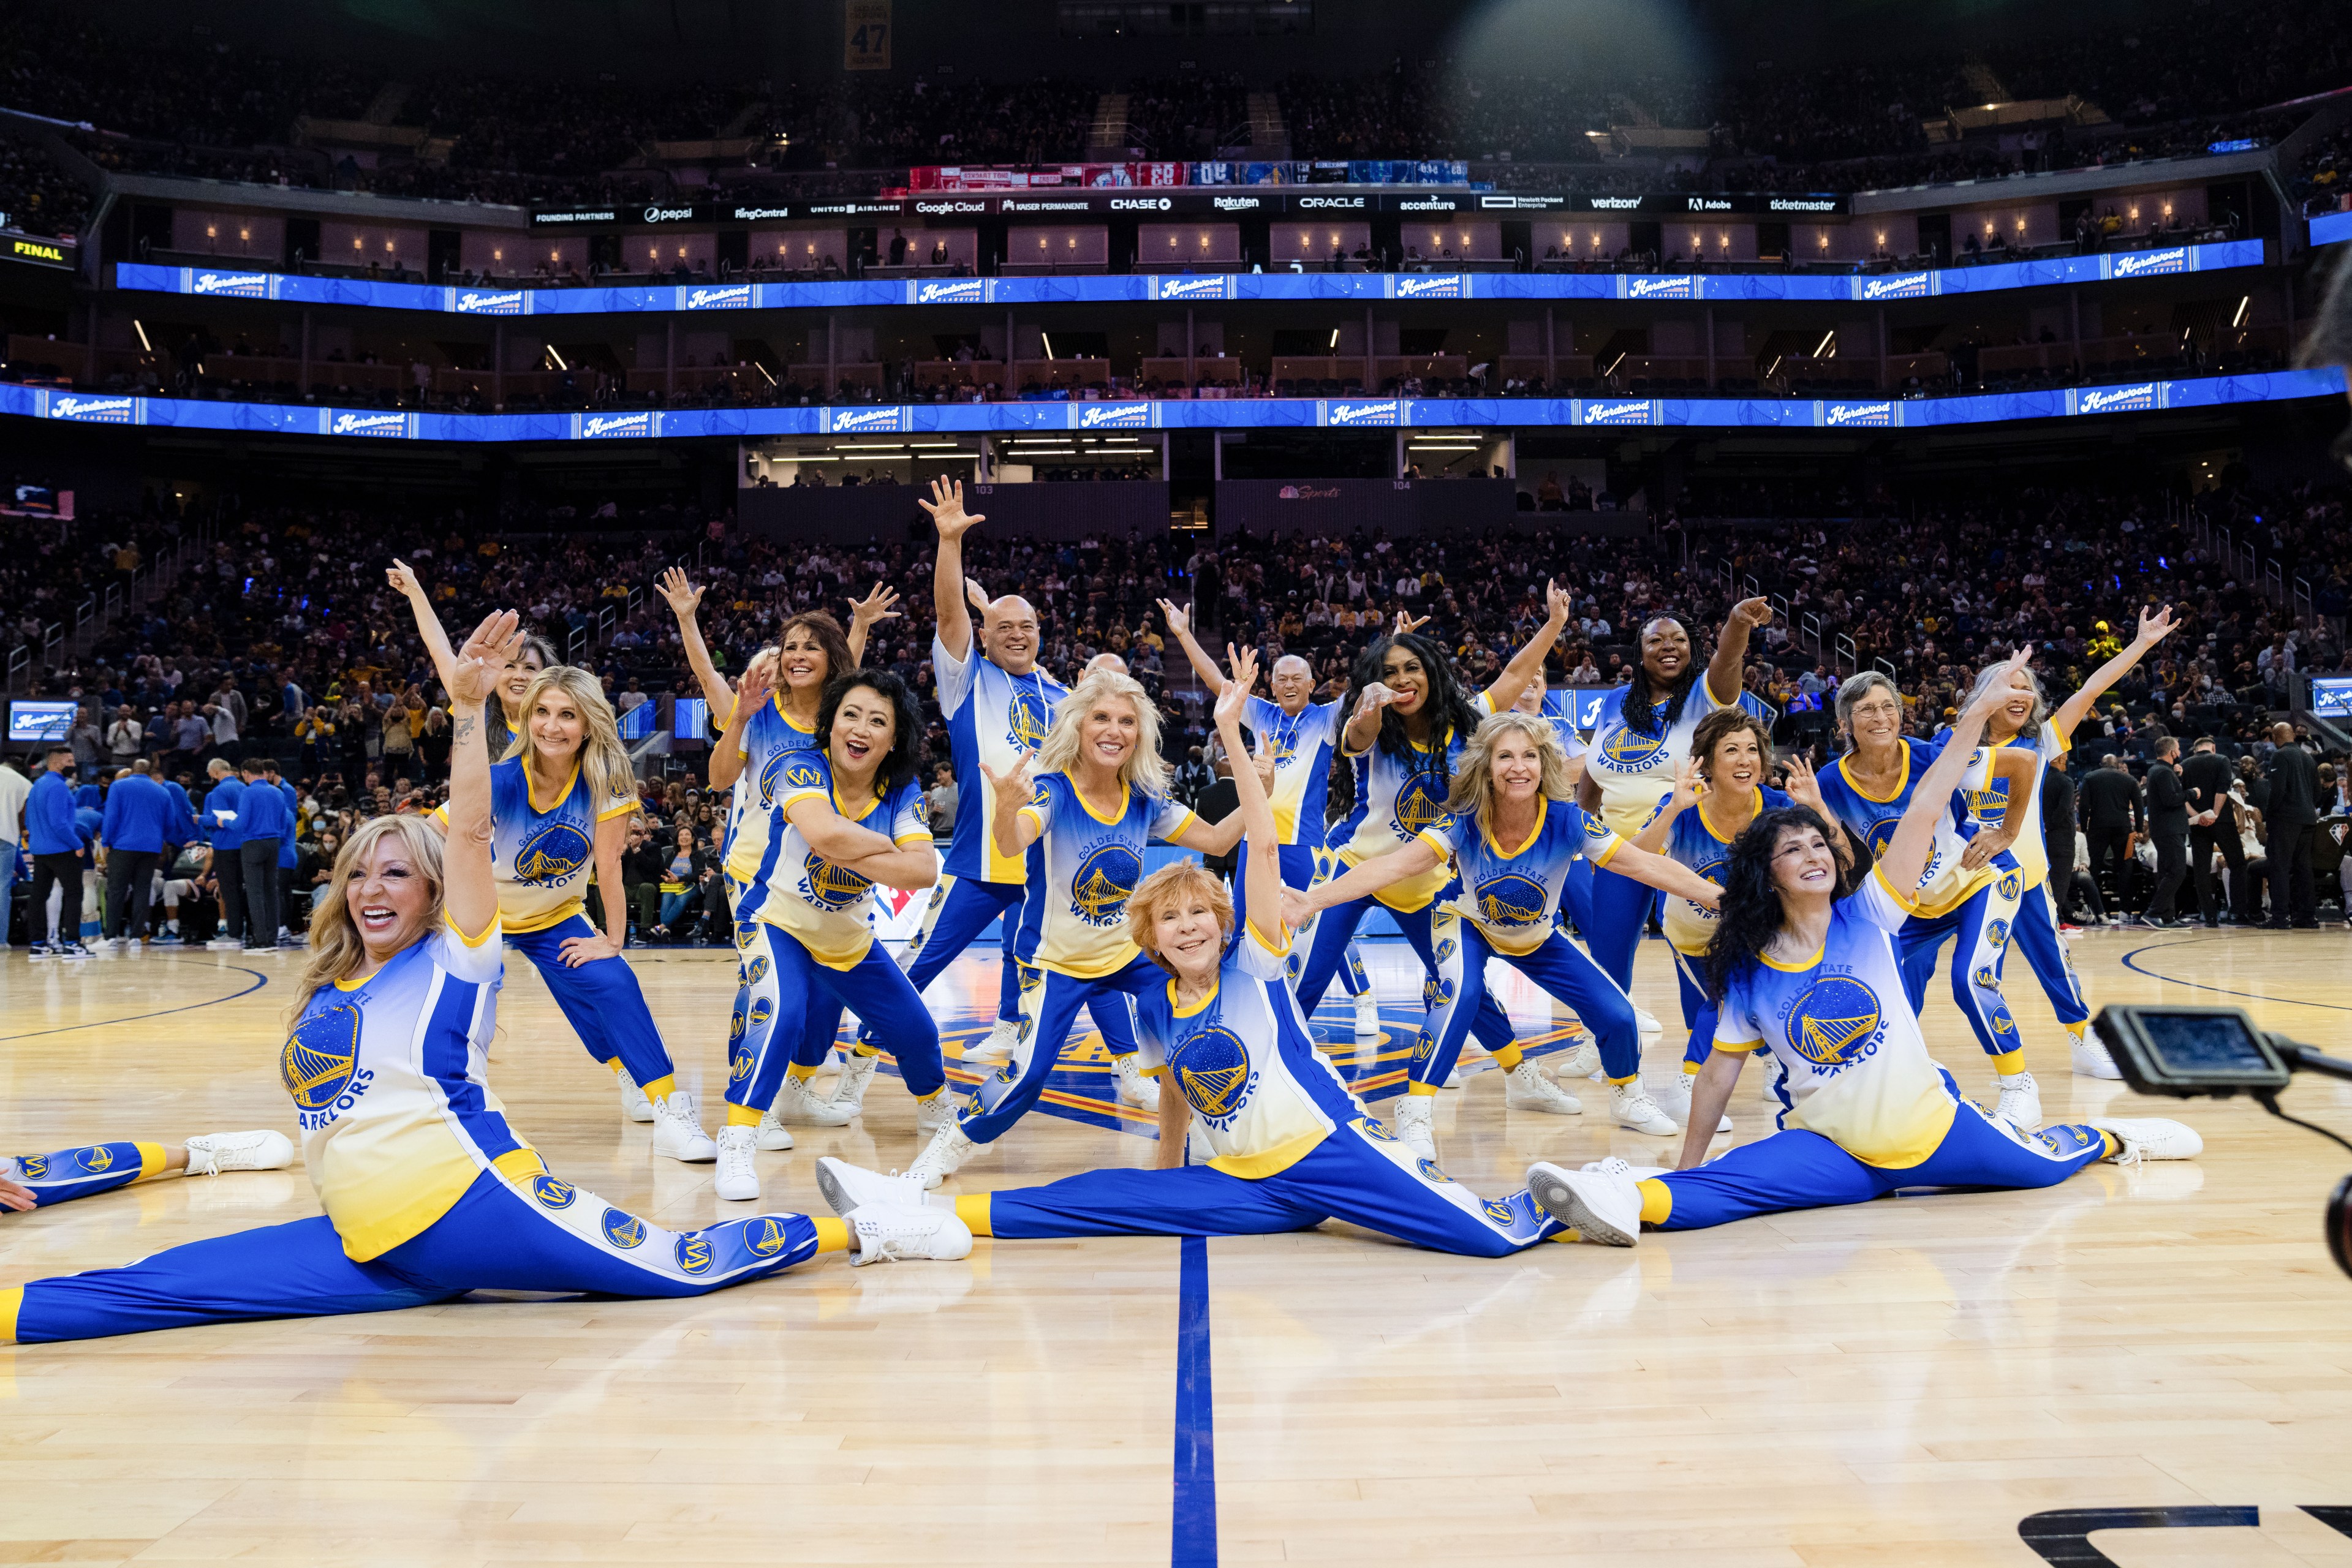 For the Warriors’ Senior Citizen Dance Squad, Age Is Just a Number